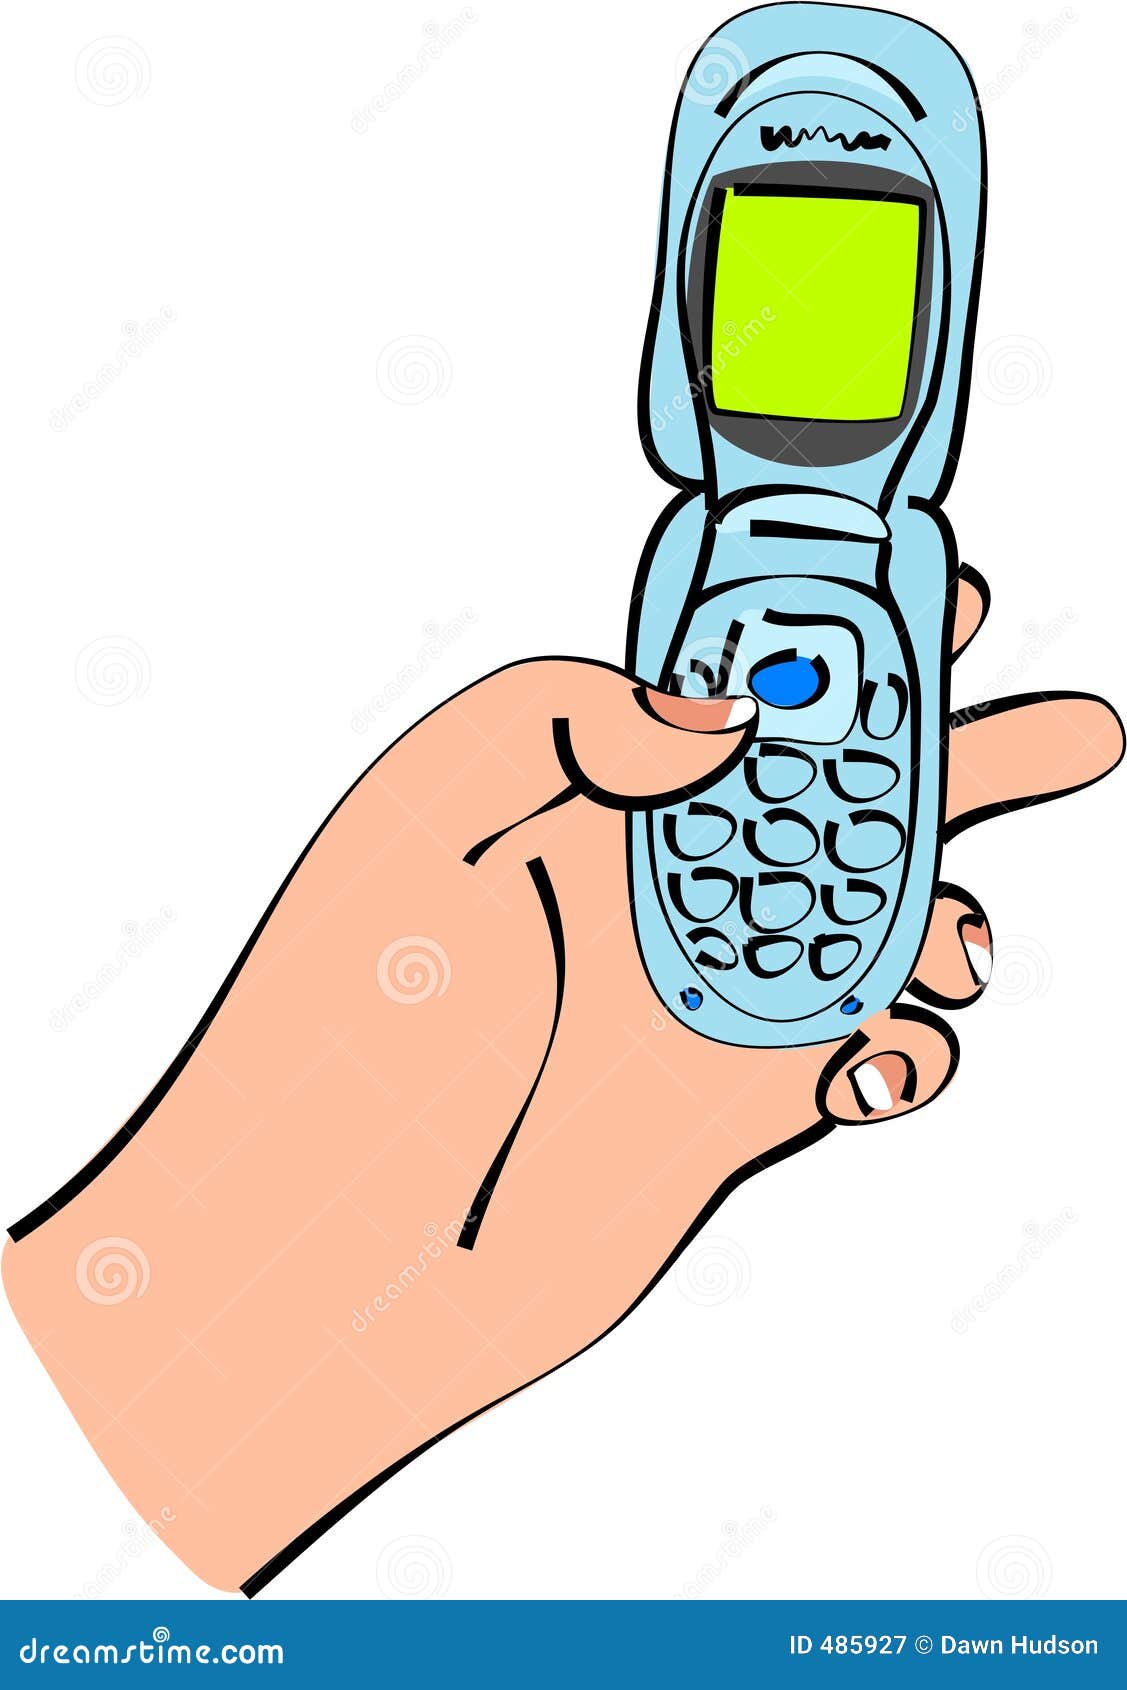 clipart for cell phone texting - photo #9